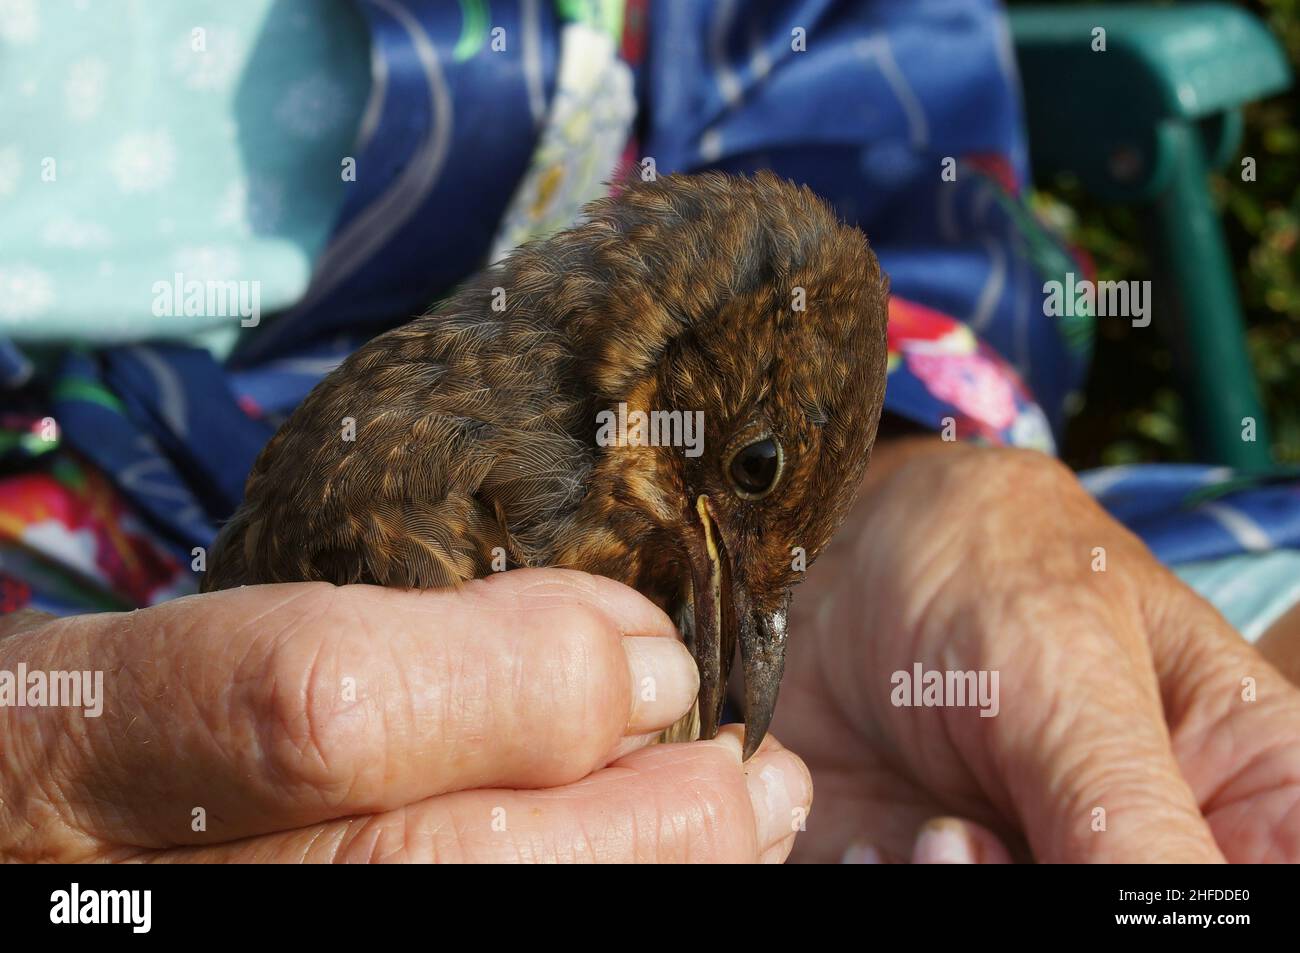 Close up of Injured young bird with food in its beak while being hand fed by a caring human Stock Photo